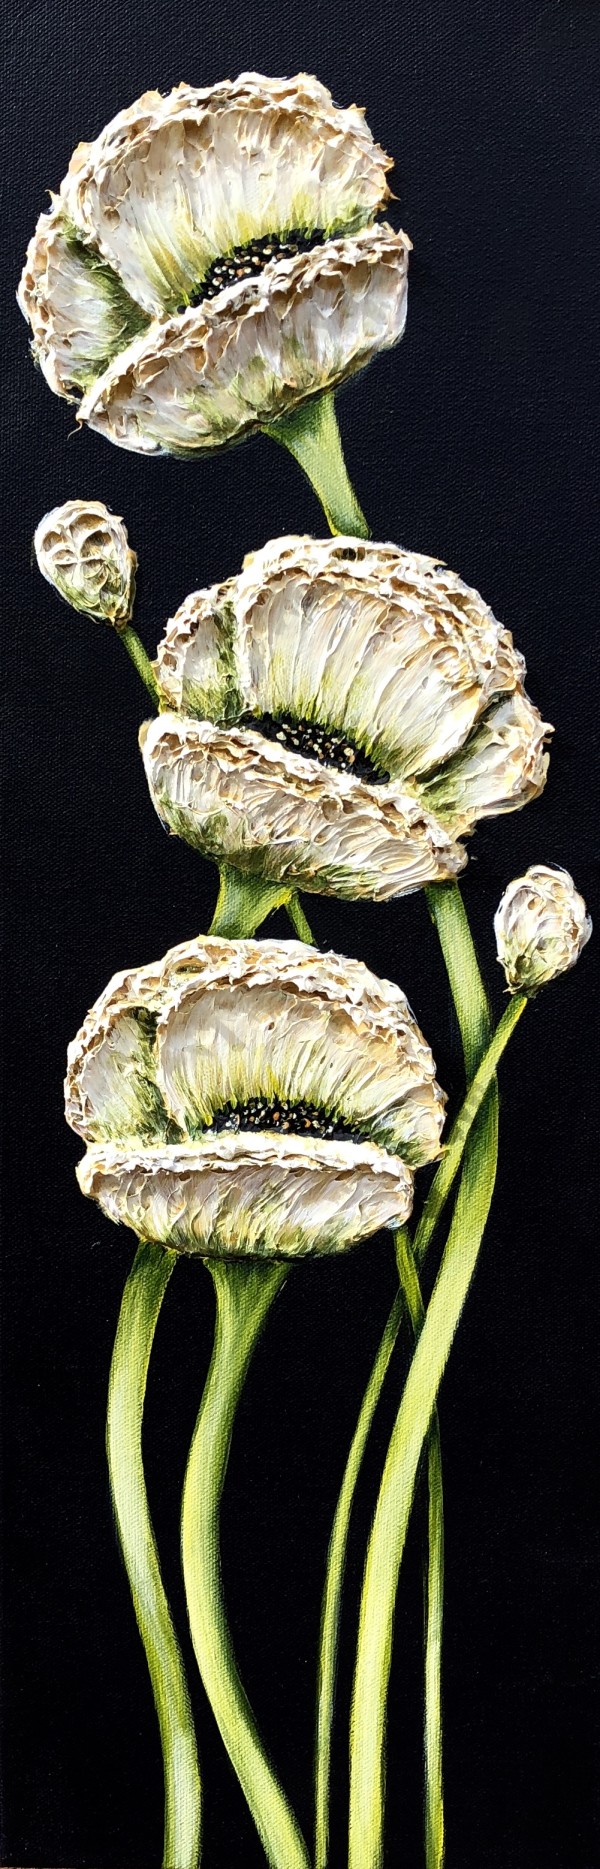 White Poppies #722 by Denise Cassidy Wood